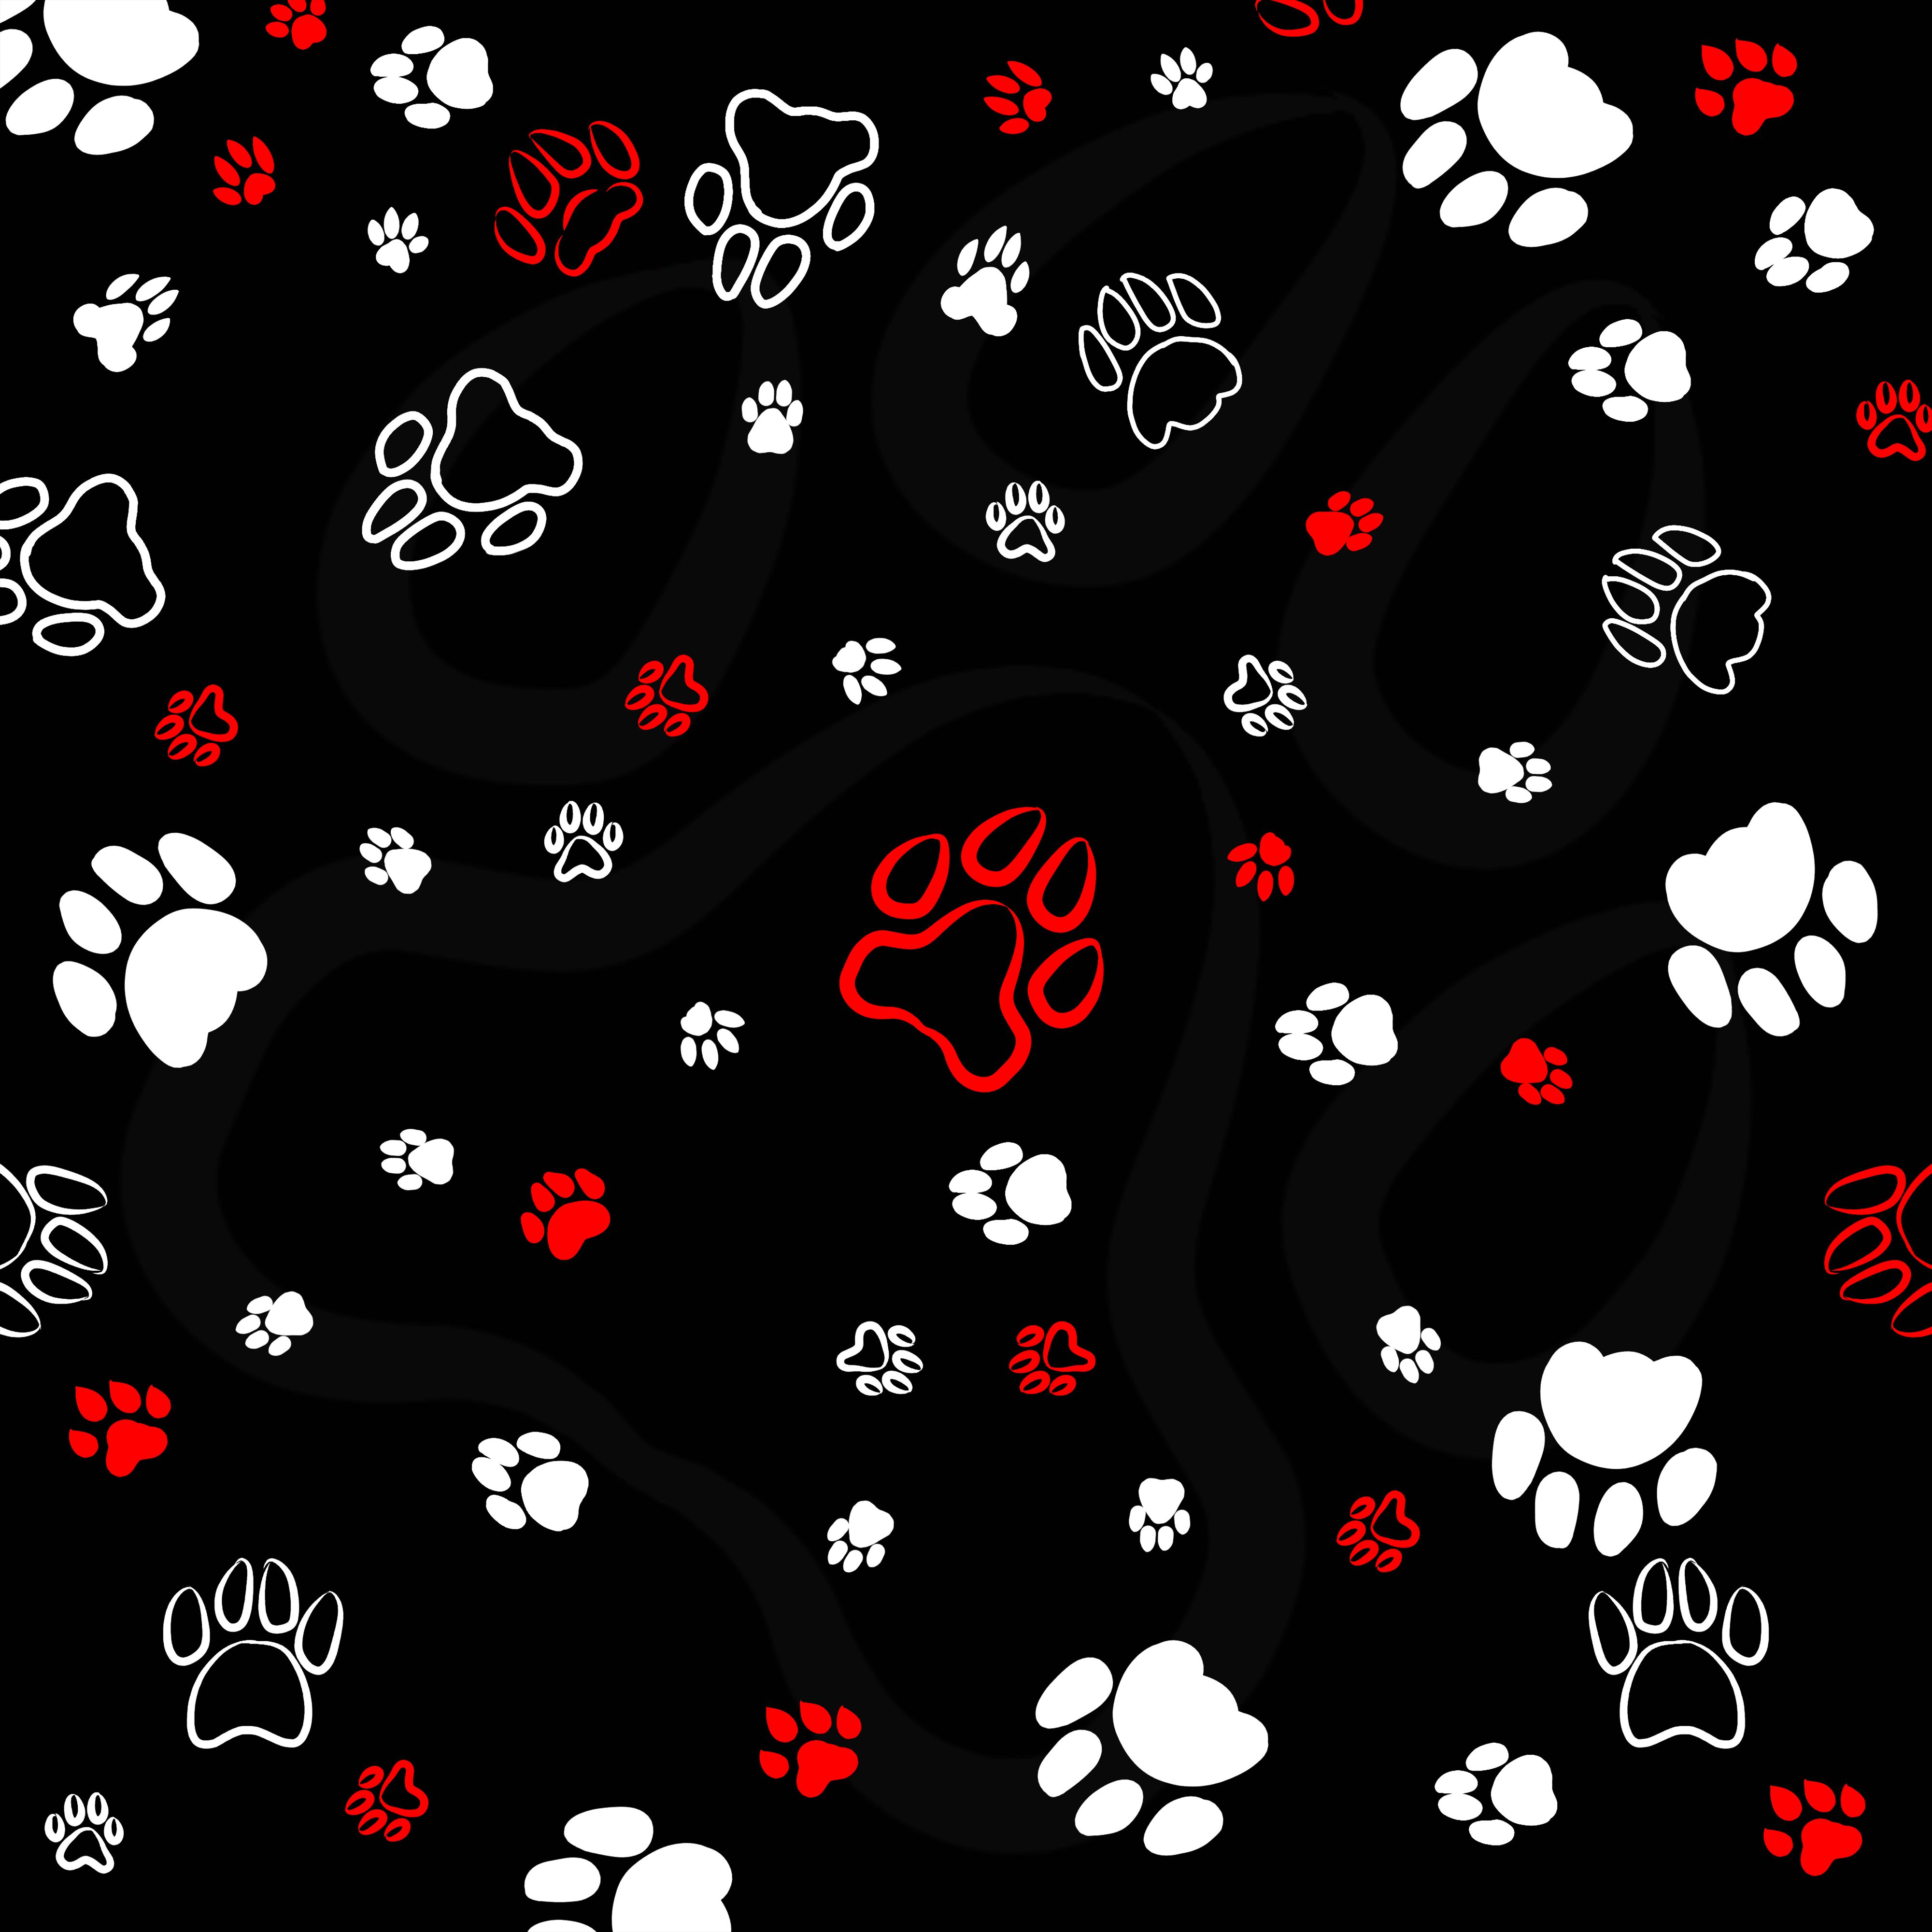 104295 Screensavers and Wallpapers Paws for phone. Download art, patterns, traces, paws pictures for free